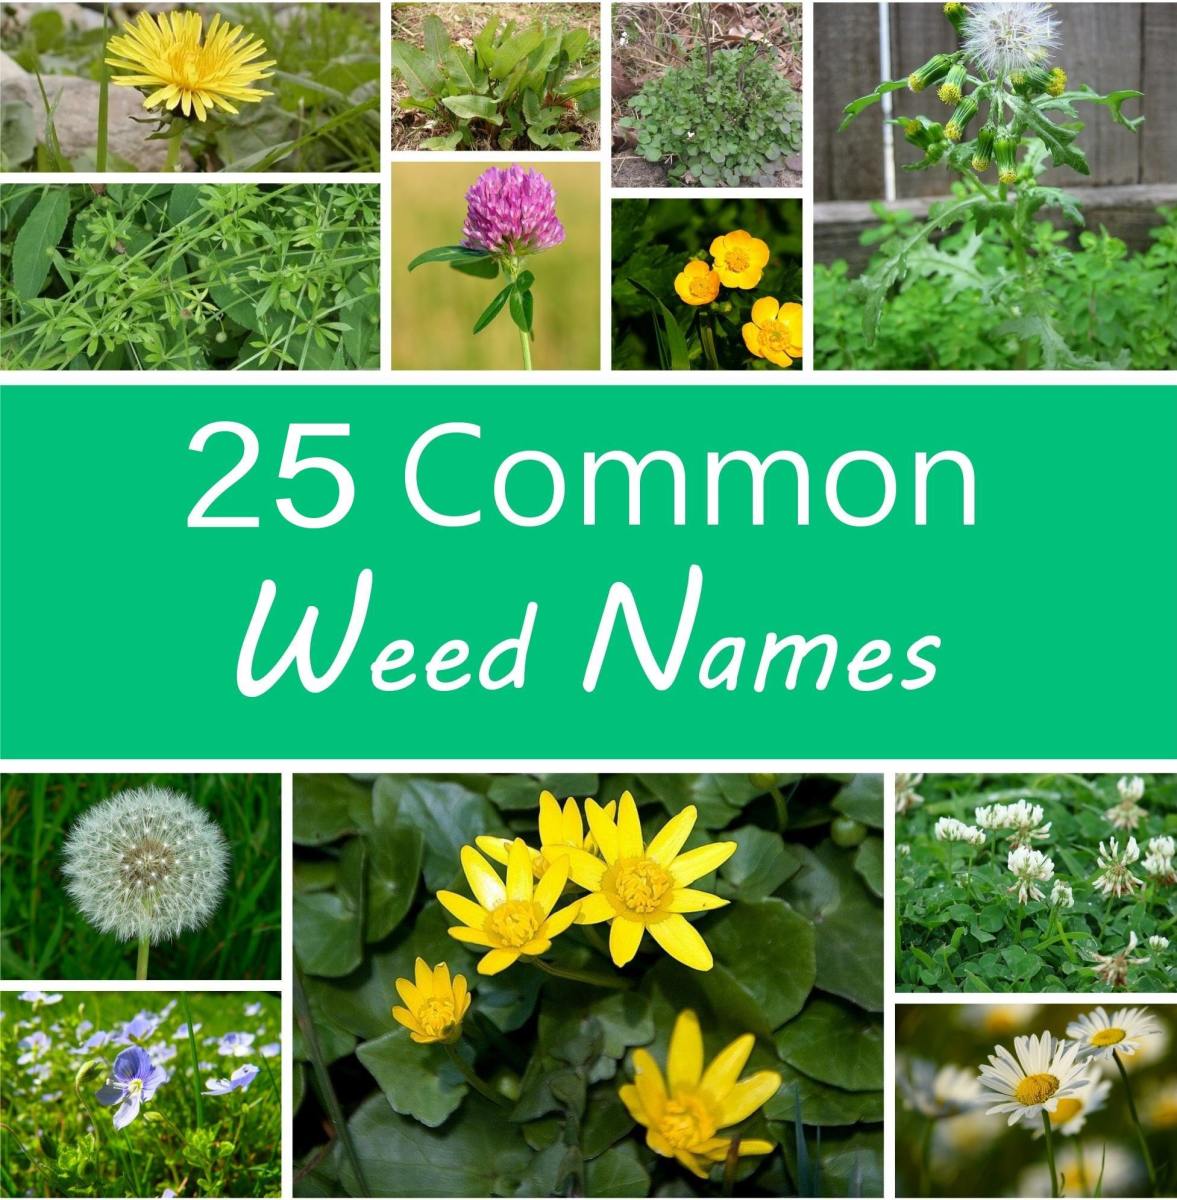 A Guide to Names of Weeds (With Pictures)